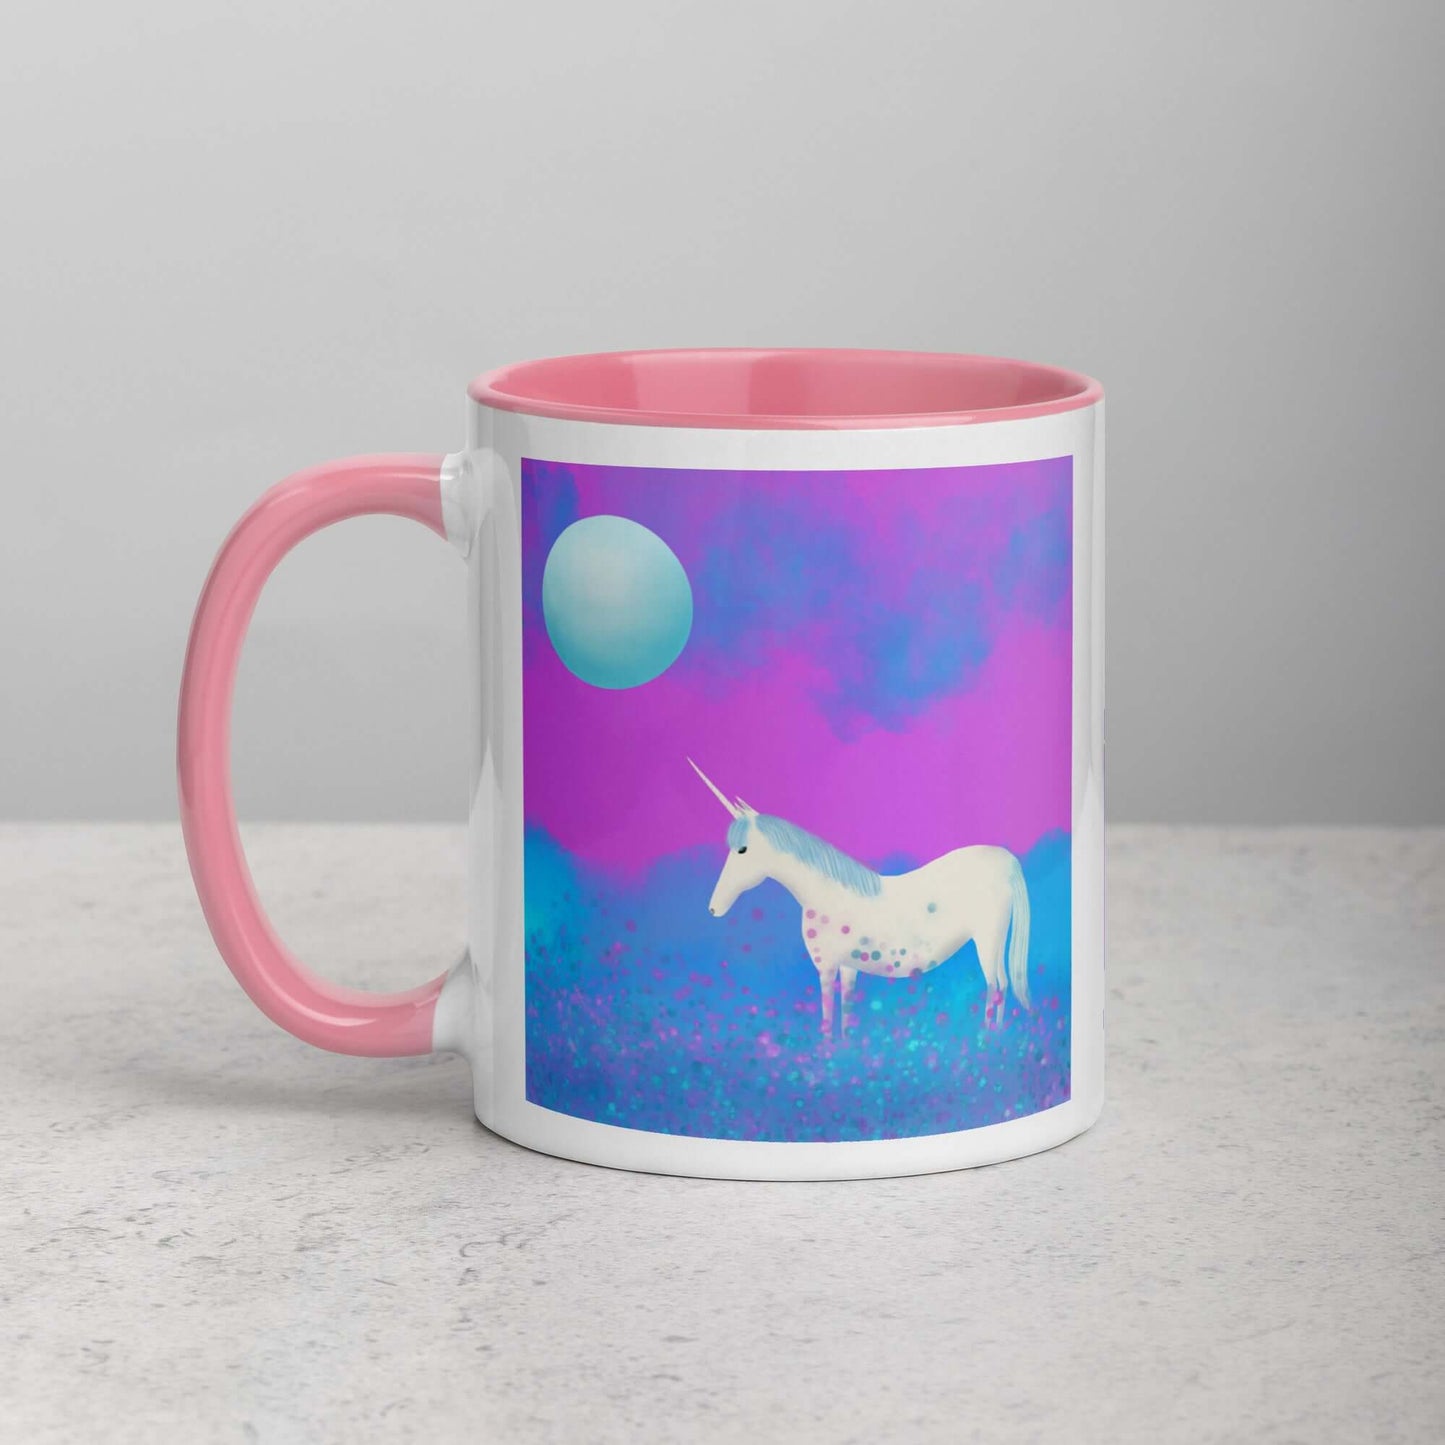 Blue and Purple Unicorn in the Mist with Full Moon “Mystical Unicorn” Mug with Light Pink Color Inside Left Handed Front View